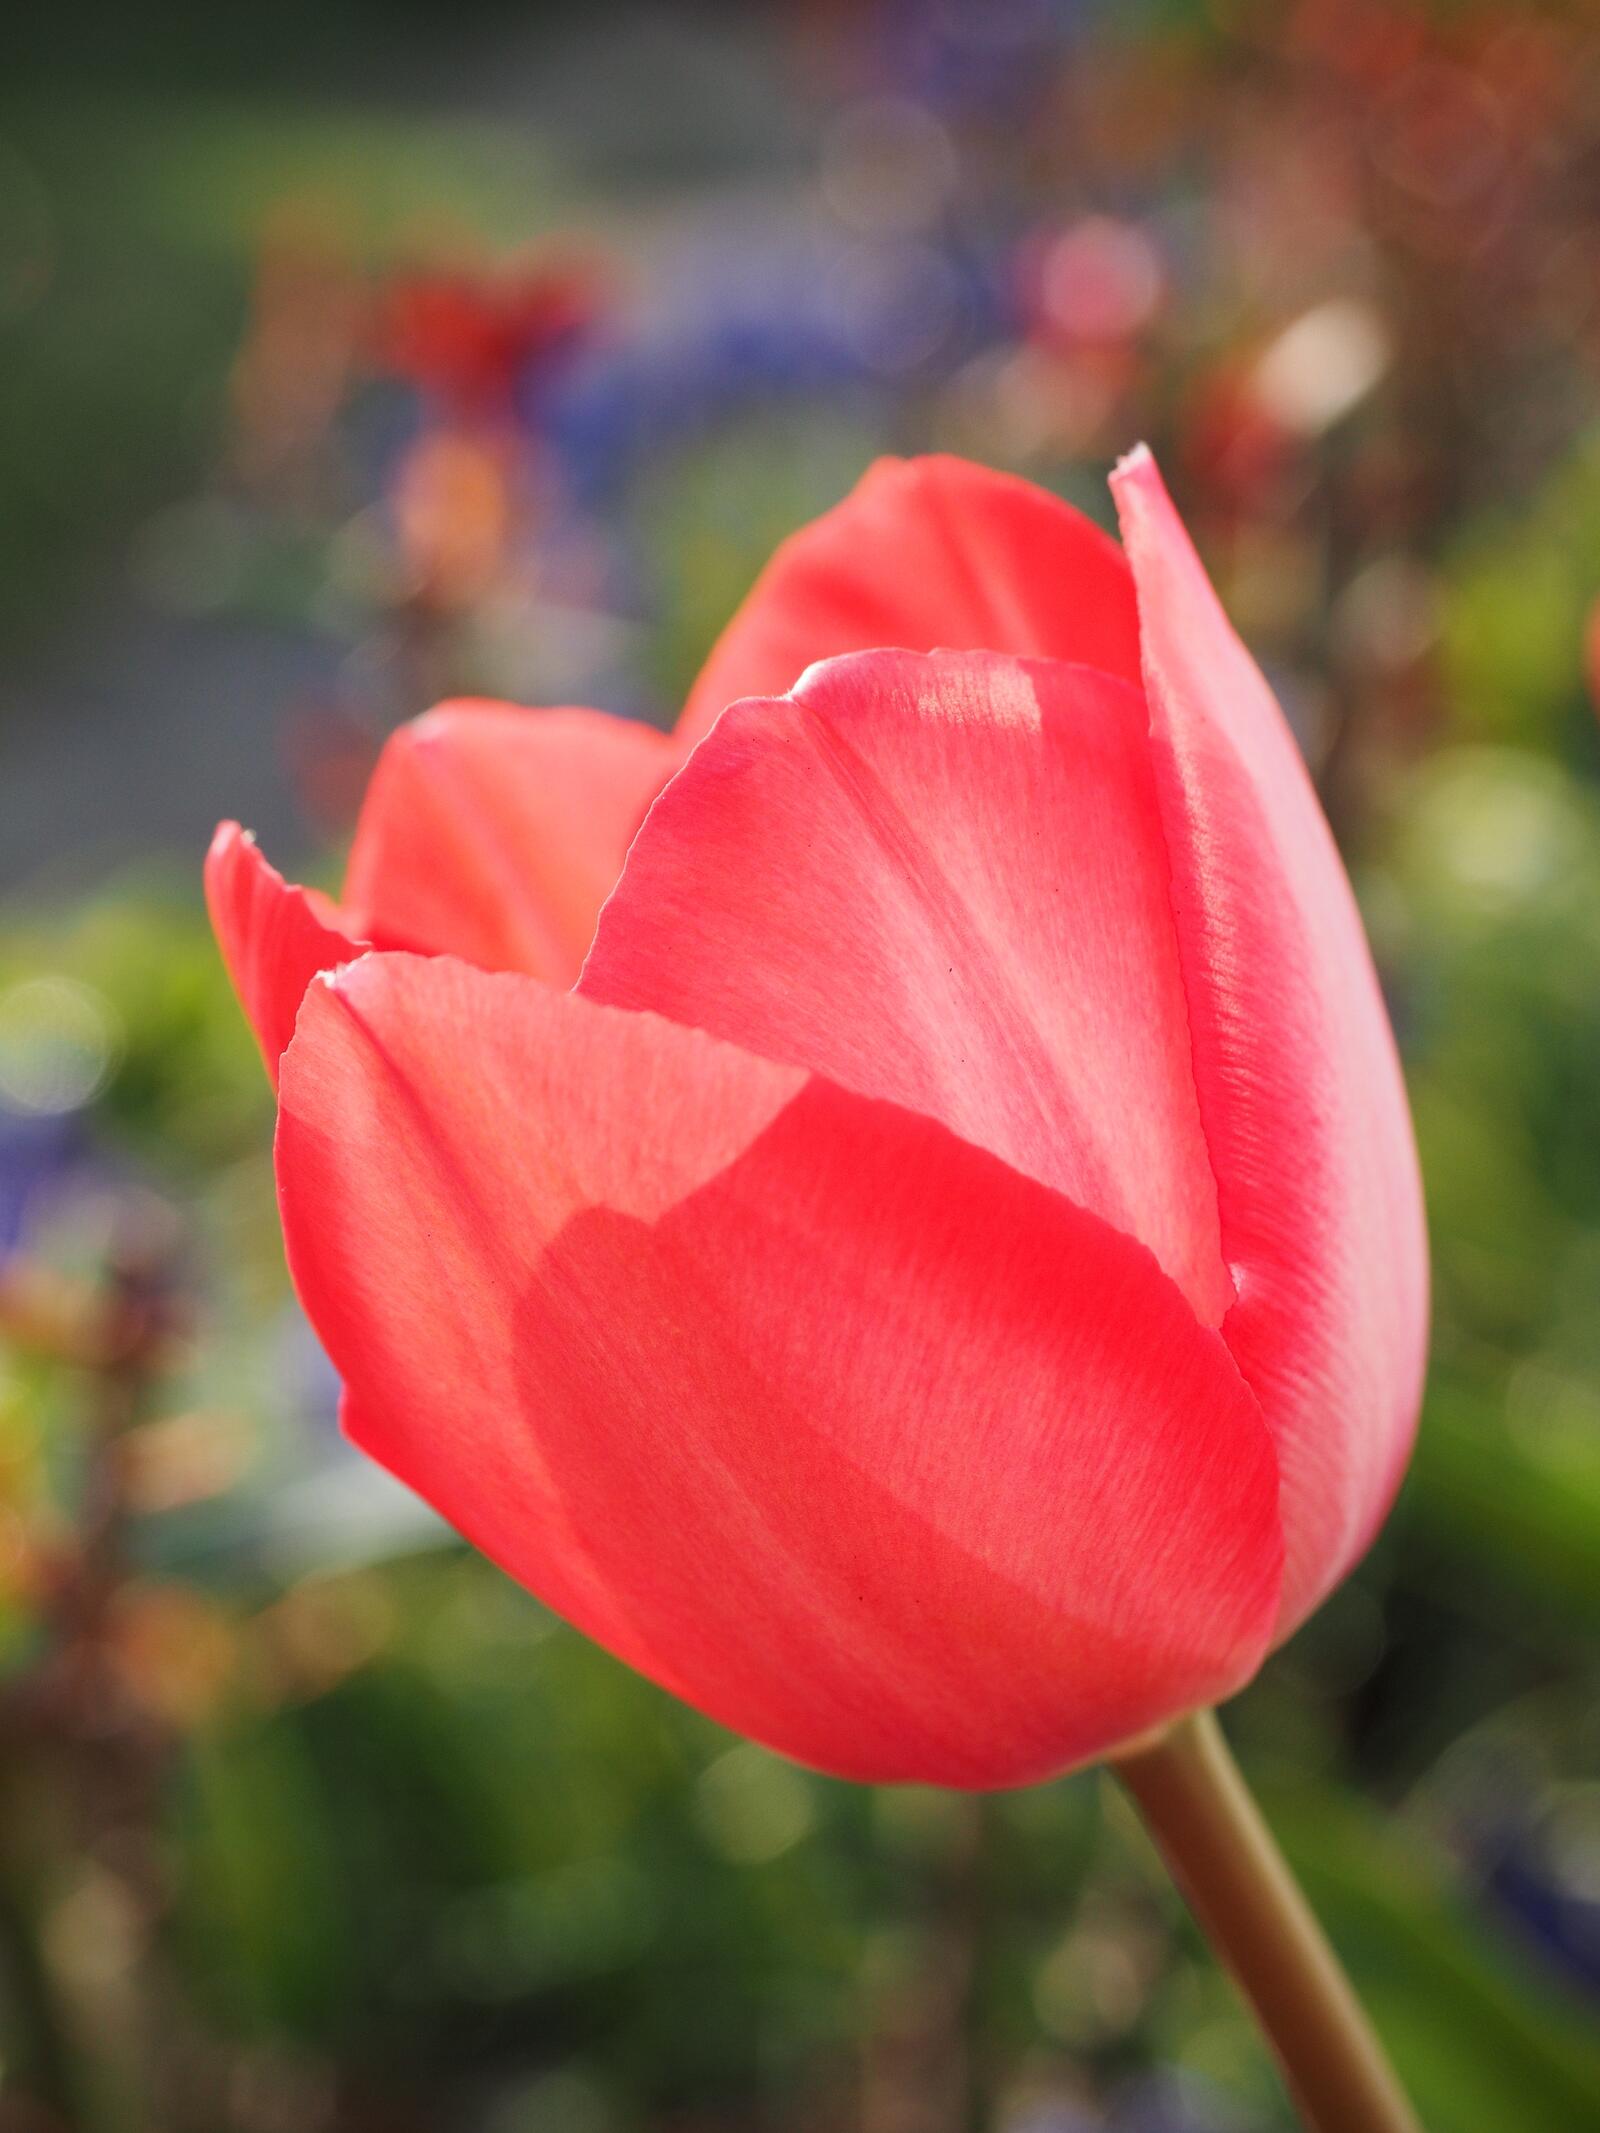 Free photo The colorful bud of an unfolded red tulip